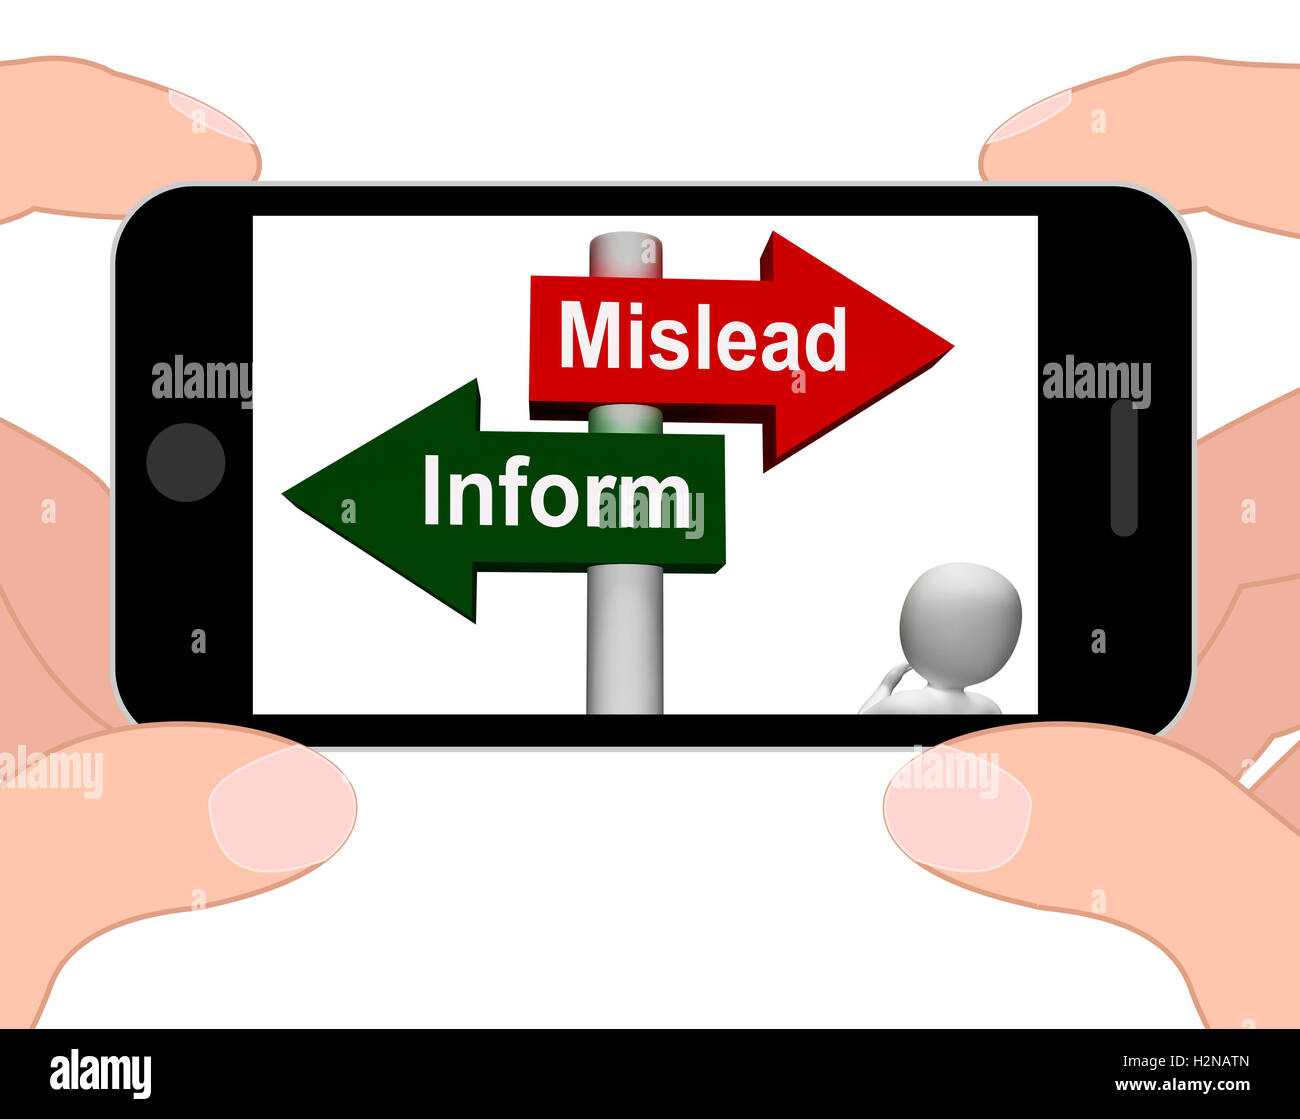 Mislead Inform Signpost Displaying Misleading Or Informative Advice Stock Photo